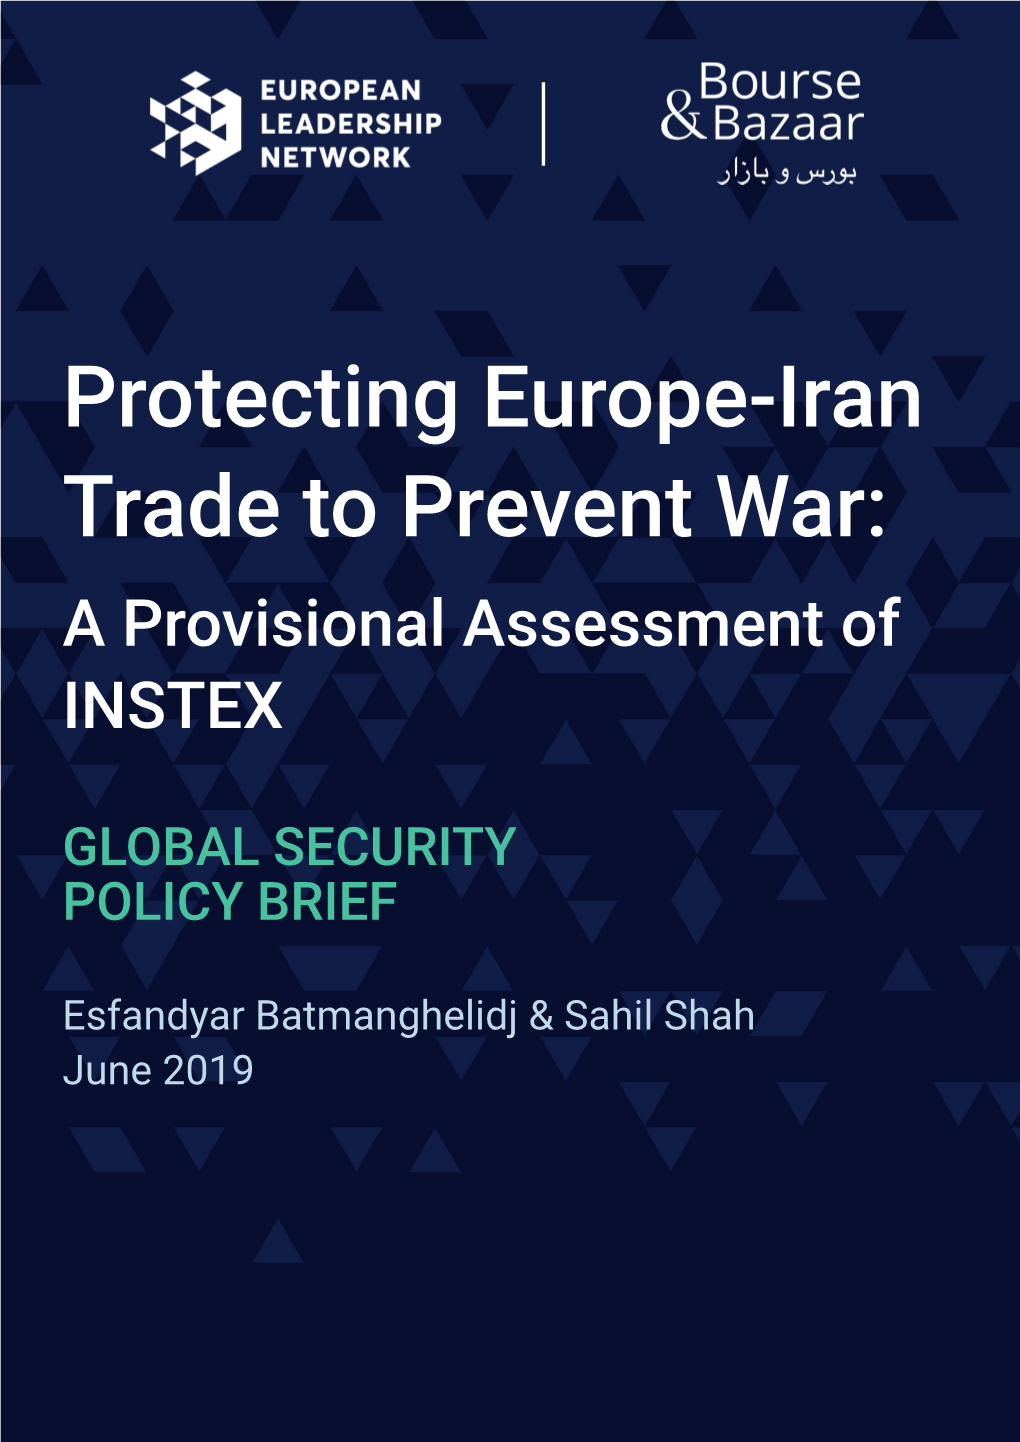 Protecting Europe-Iran Trade to Prevent War: a Provisional Assessment of INSTEX